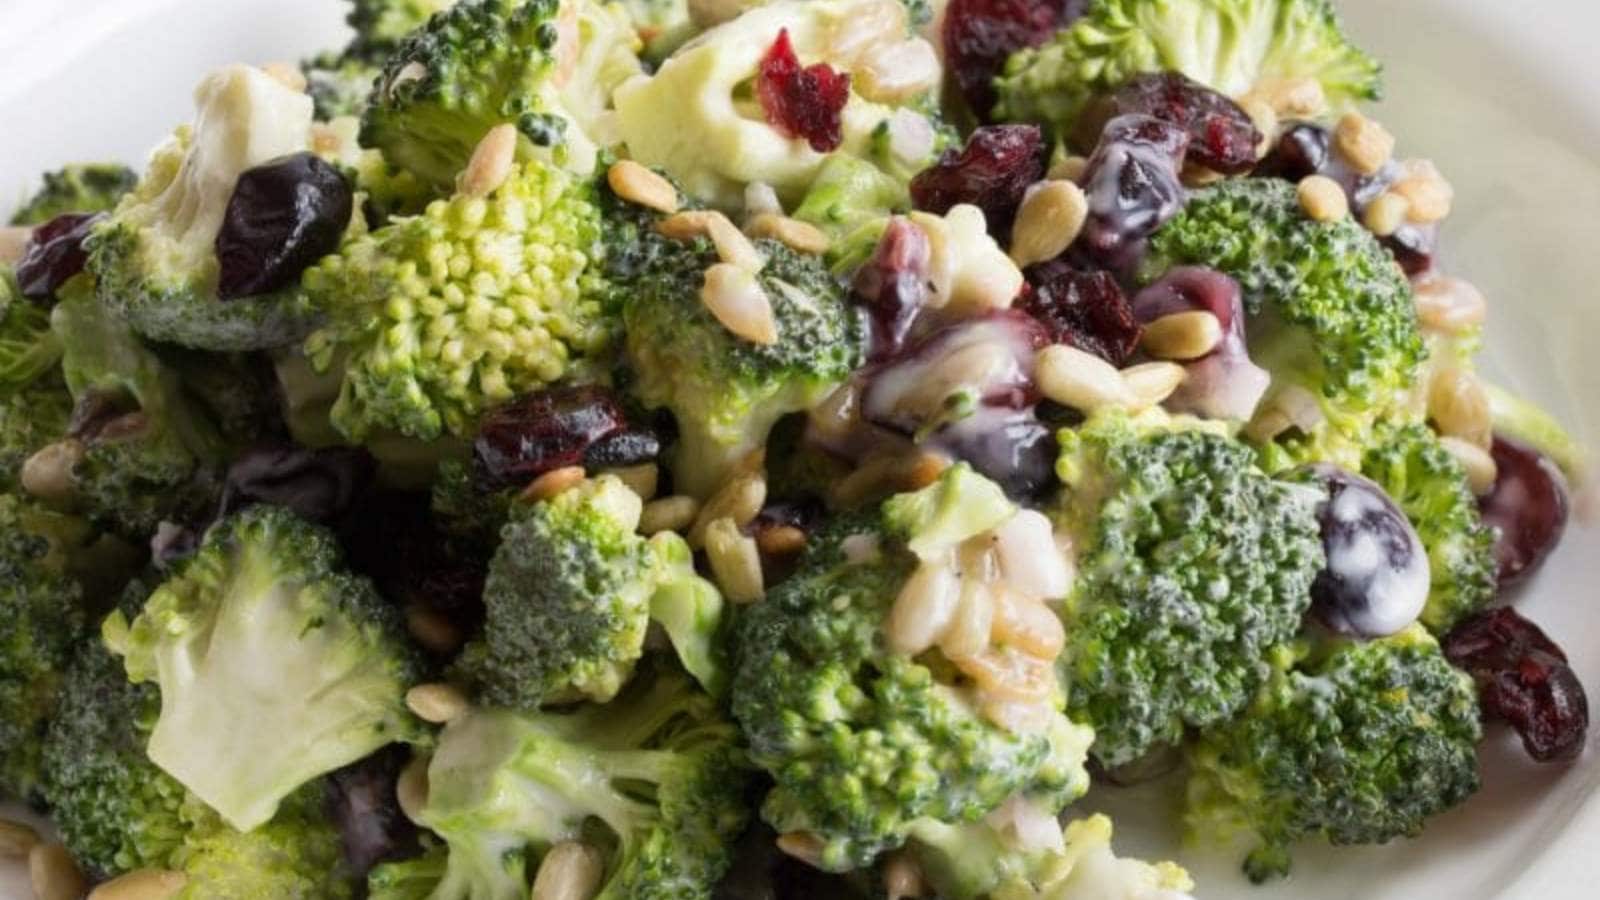 Broccoli Salad With Cranberries And Sunflower Seeds recipe by Pear Tree Kitchen.